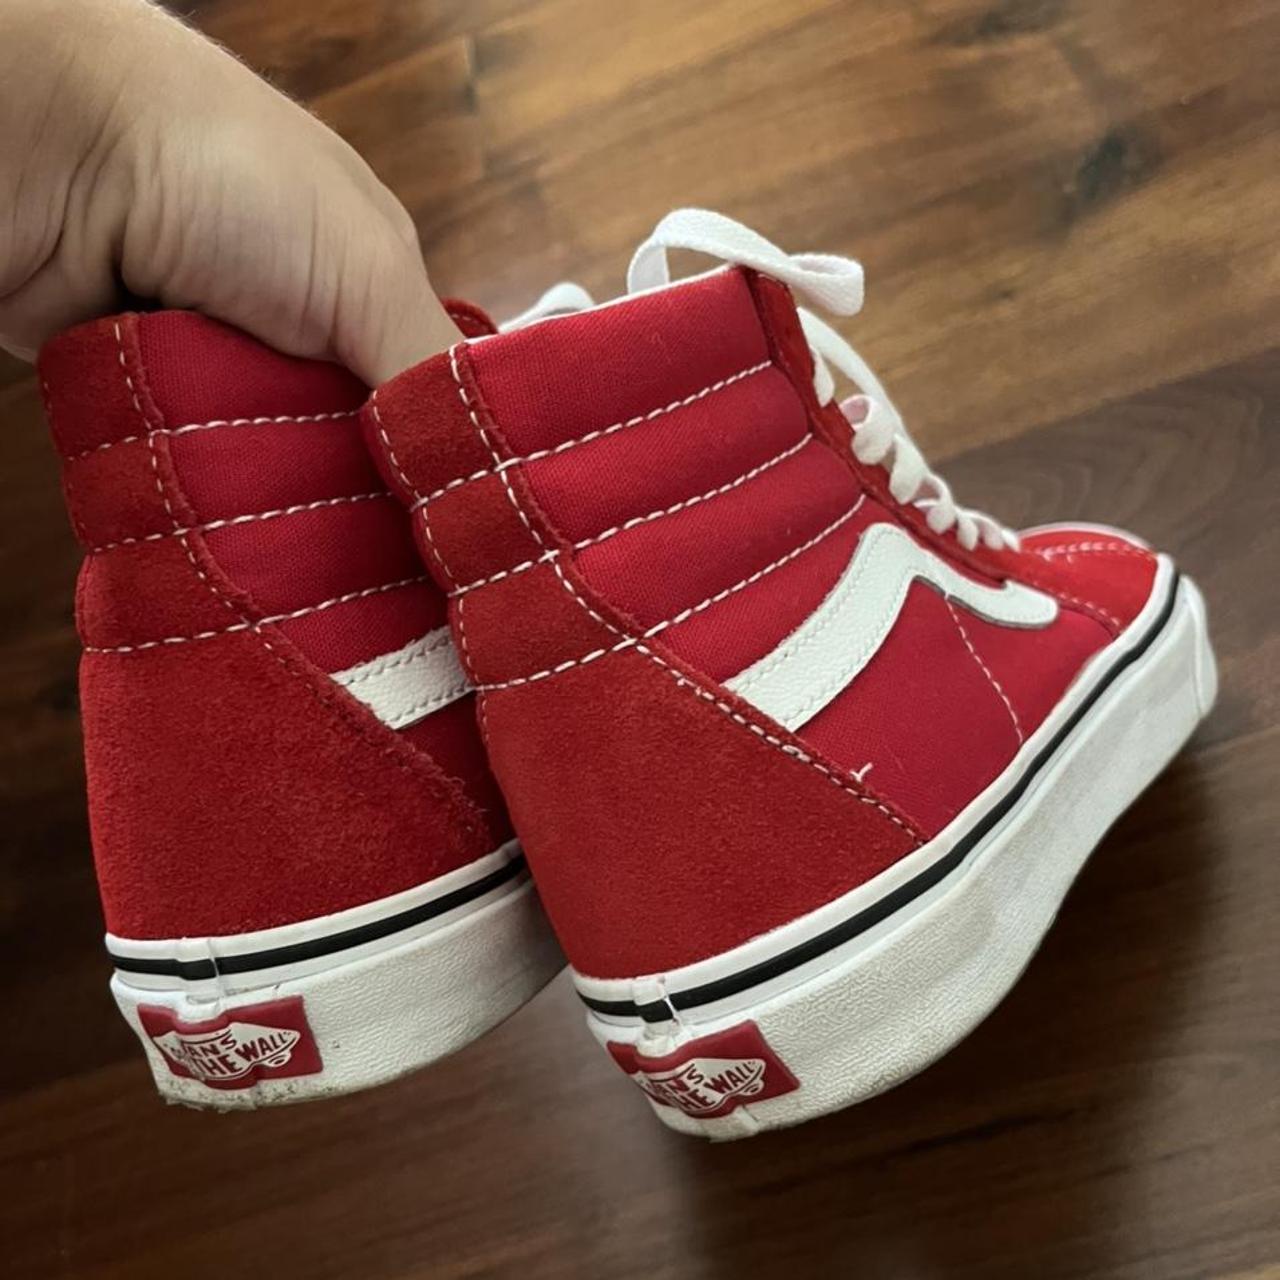 Red high top vans only worn once! Size 6 women’s and... - Depop